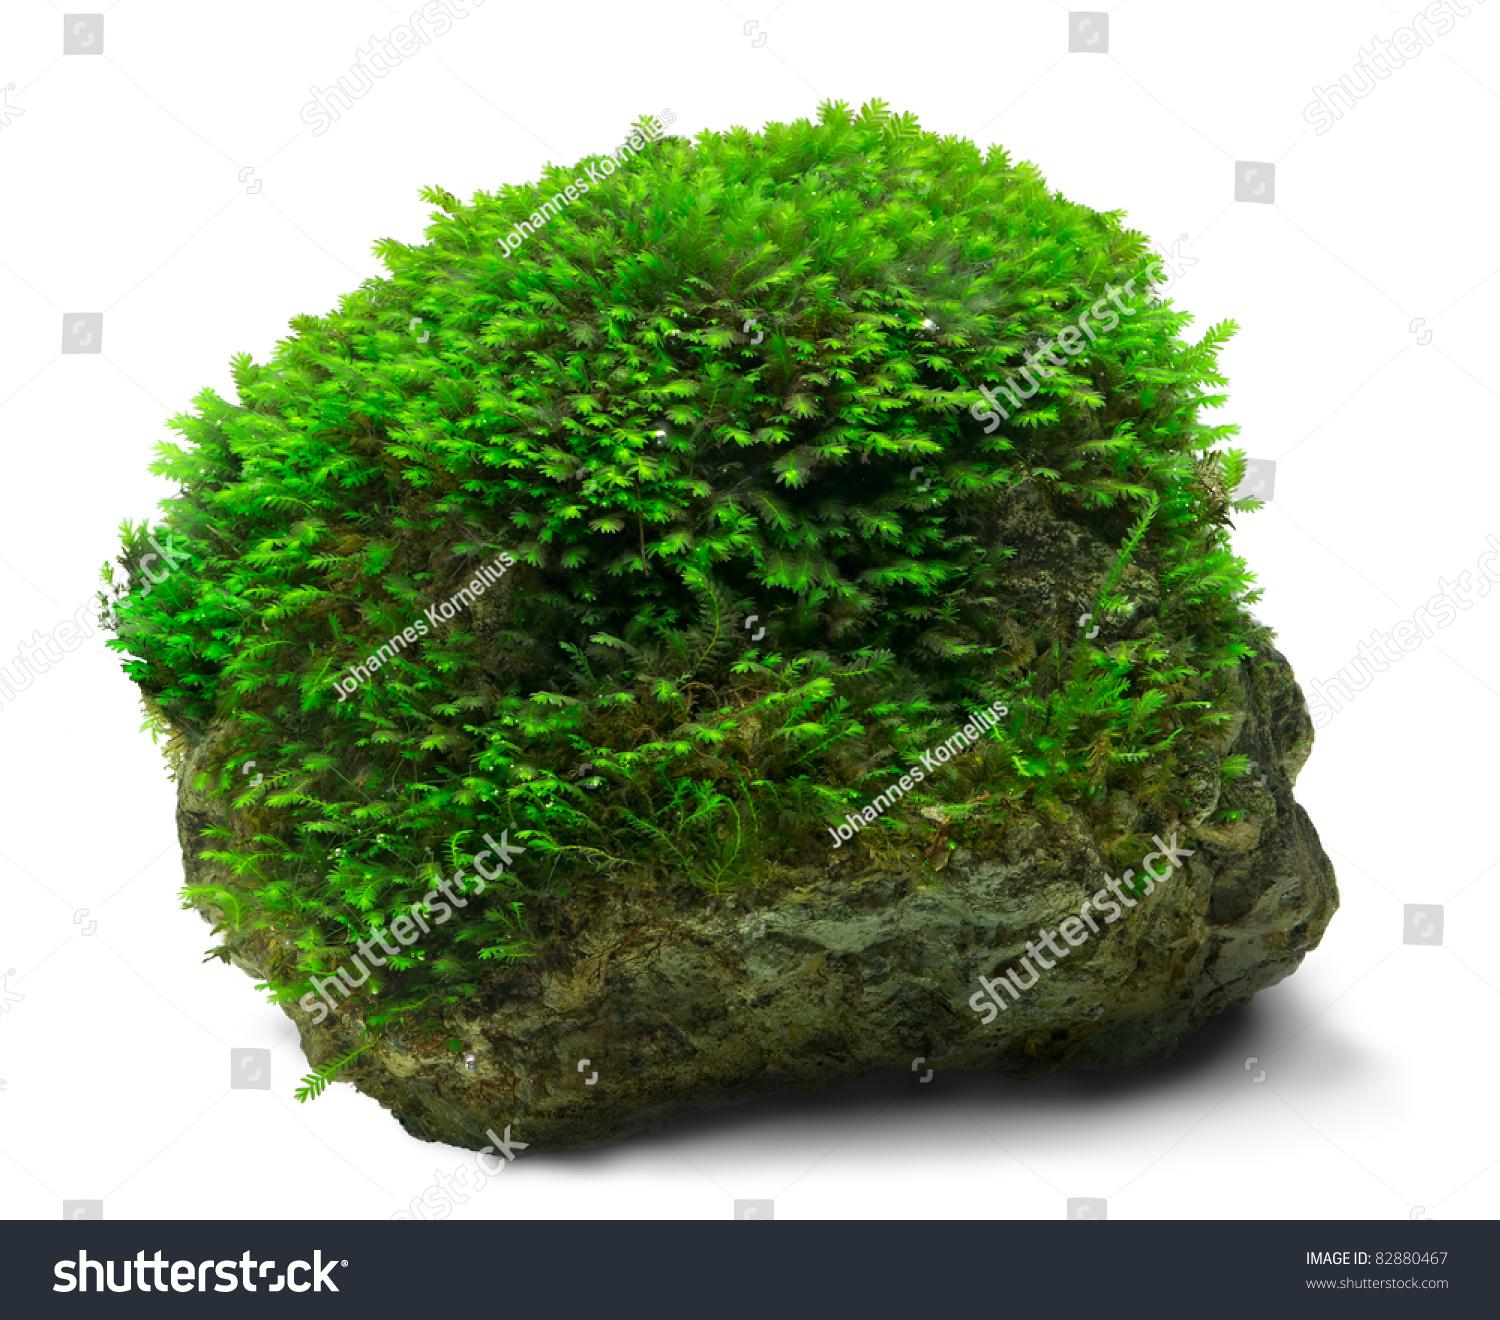 stock-photo-underwater-fissidens-moss-cover-a-rock-82880467.jpg